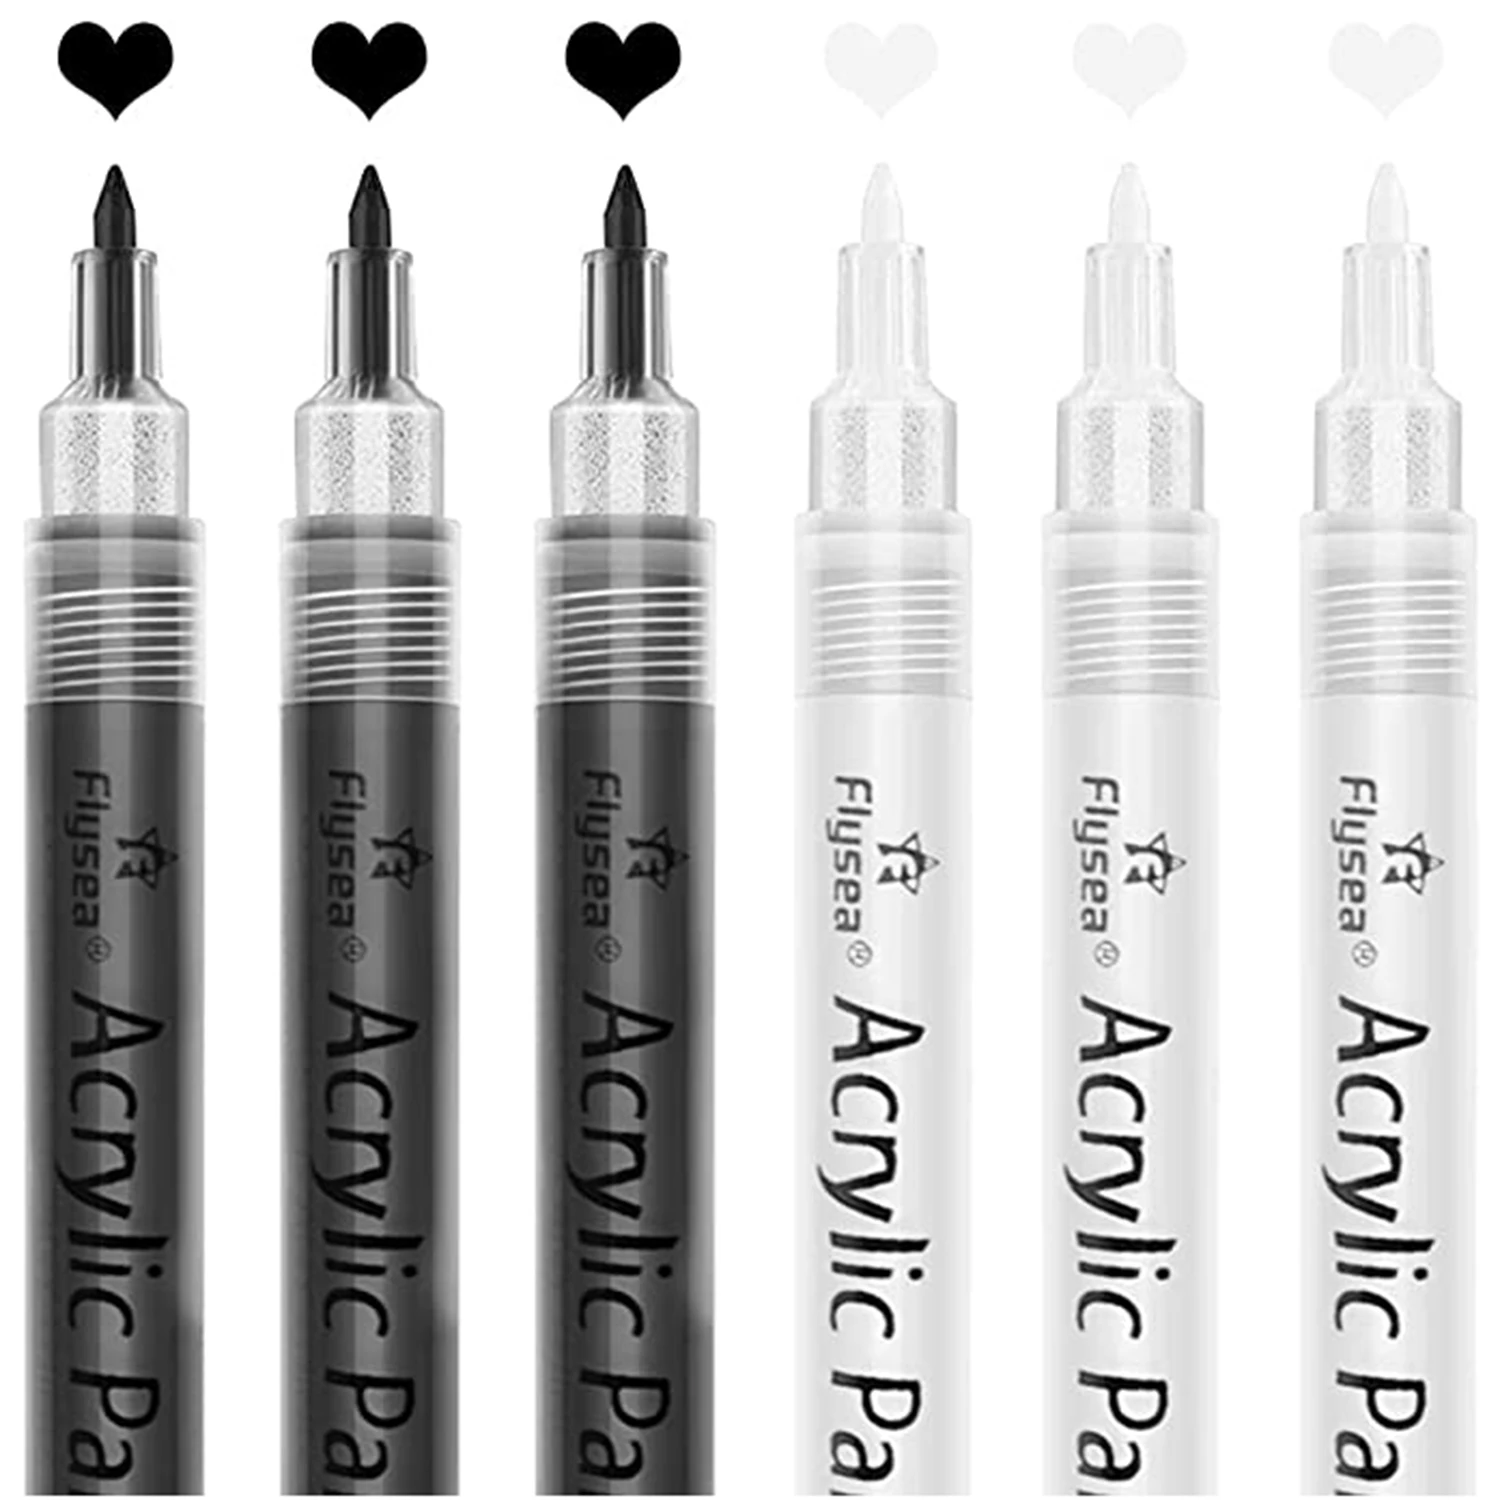 

3 Black 3 White Paint Markers 0.7mm Extra Fine Tip Acrylic Paint Pens for Rock Painting Stone Water-Based Acrylic Paint Sets